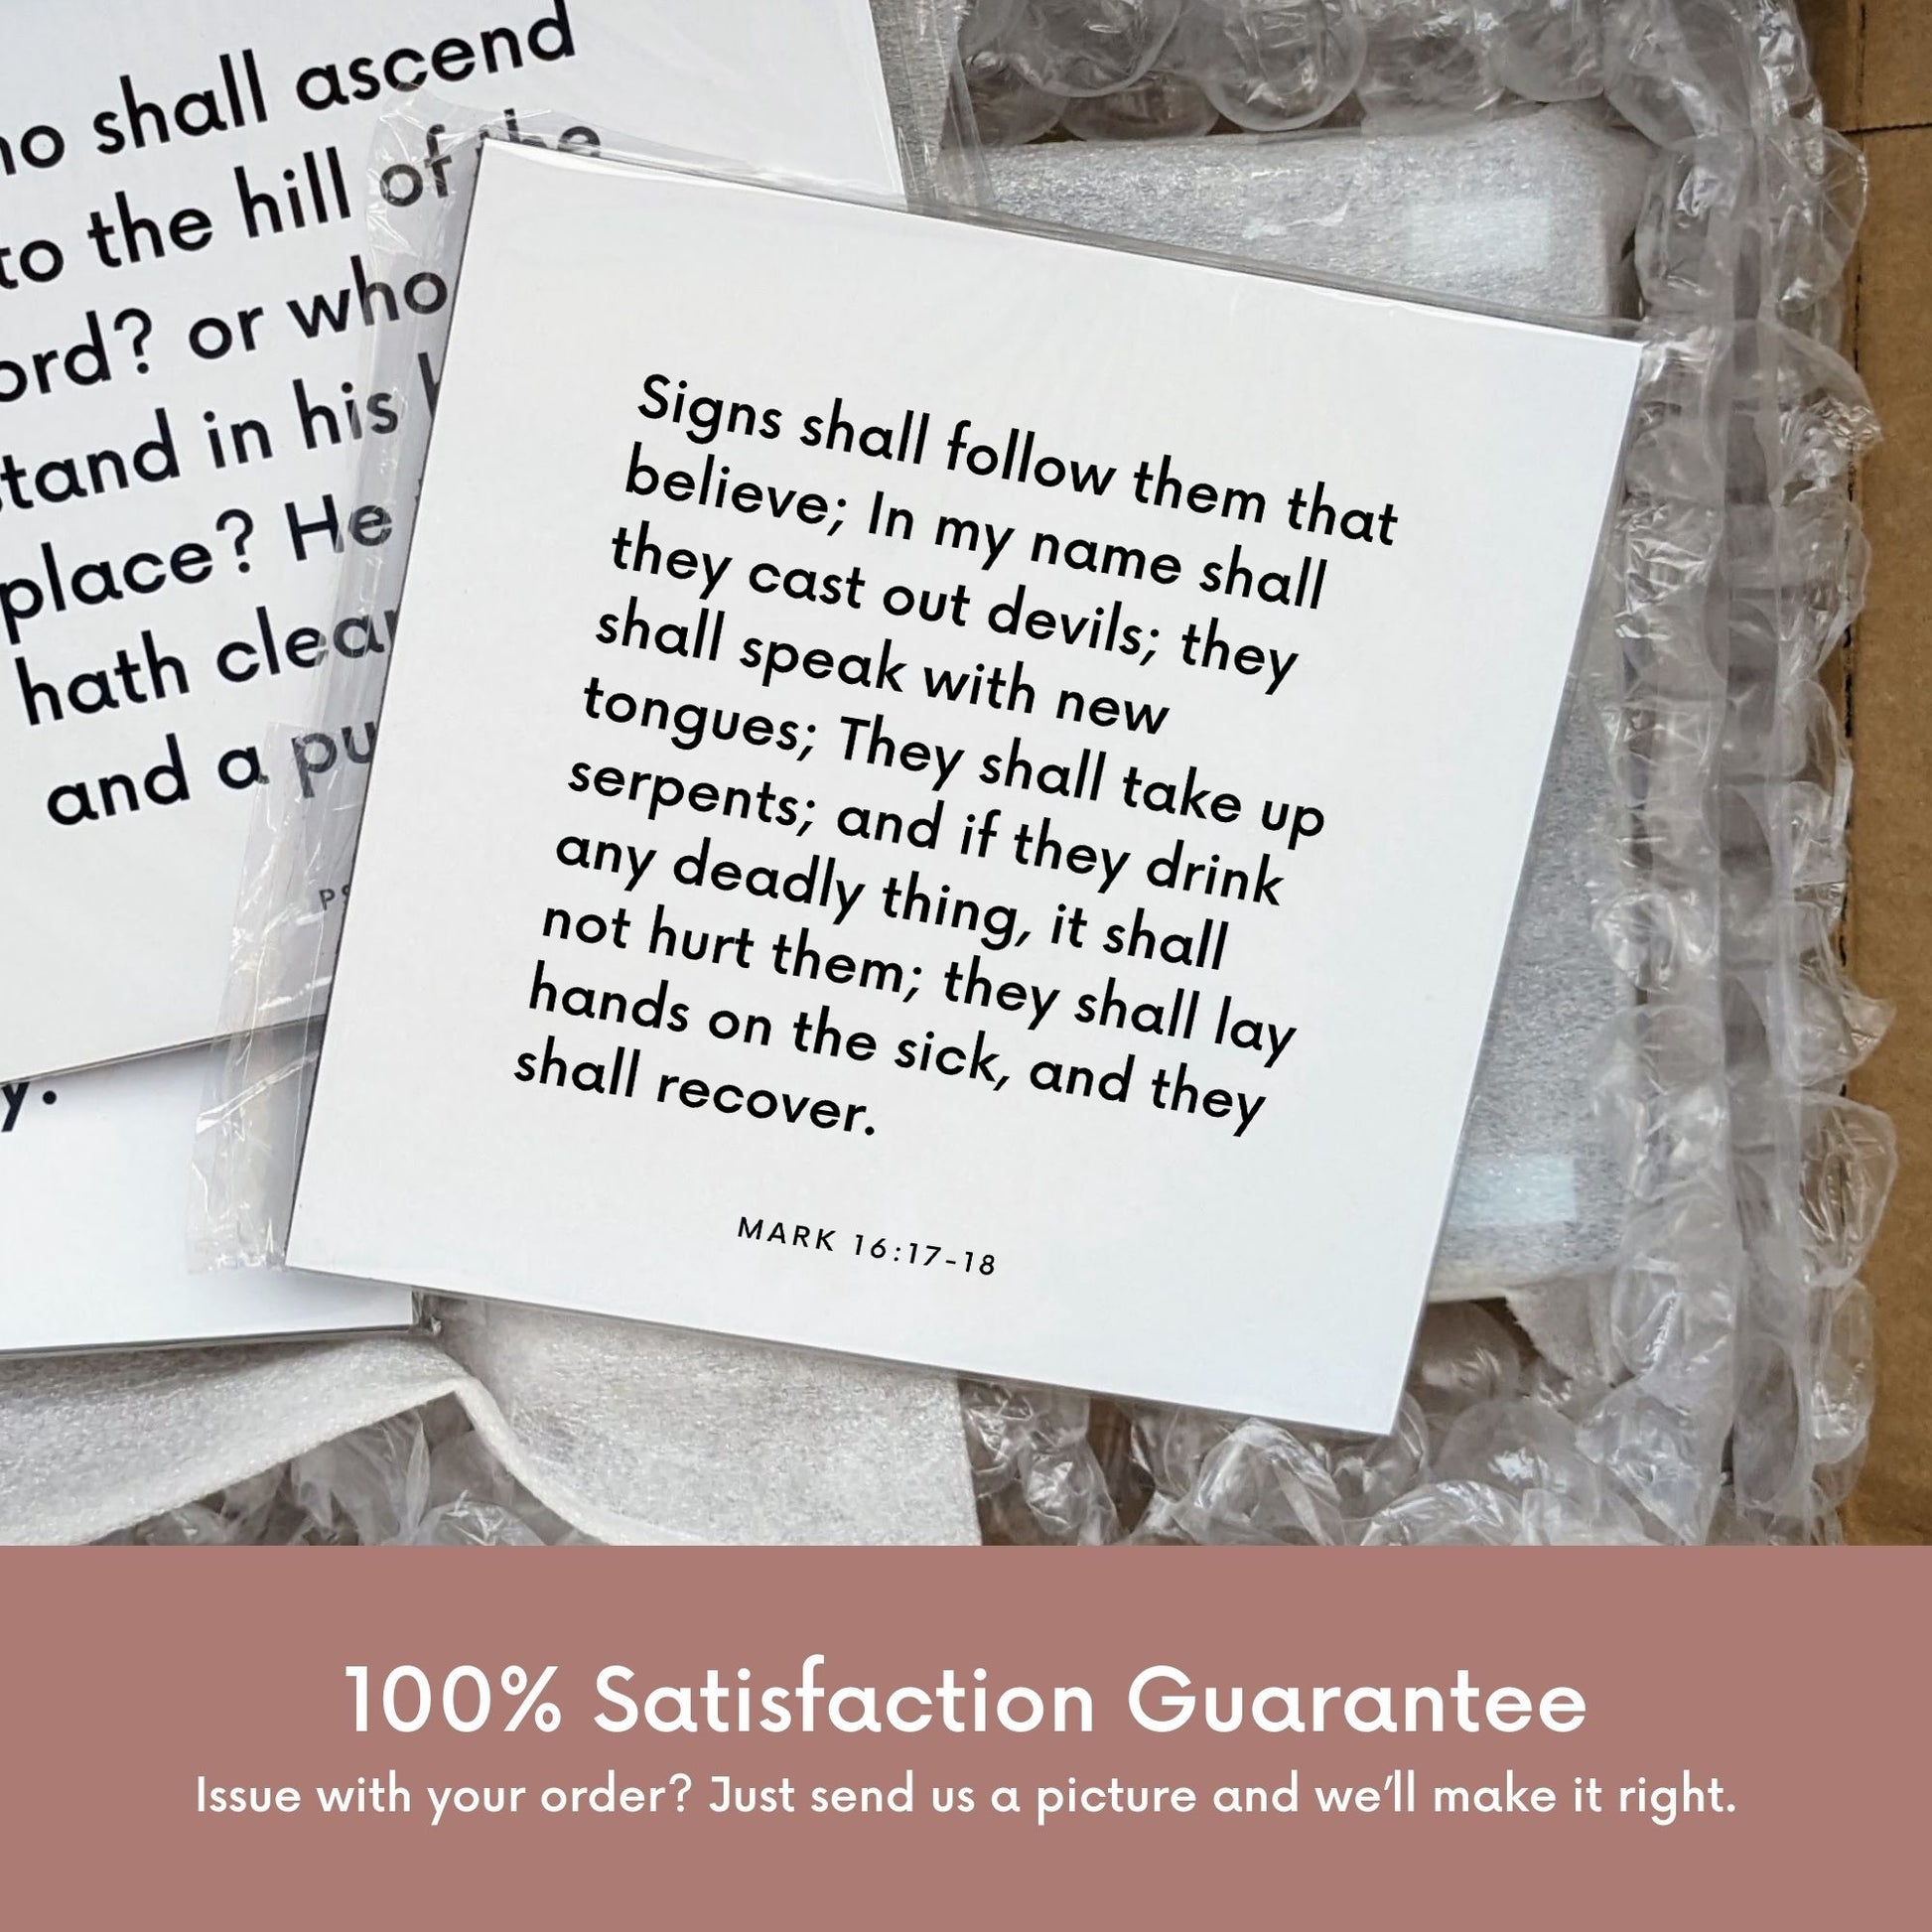 Shipping materials for scripture tile of Mark 16:17-18 - "Signs shall follow them that believe"